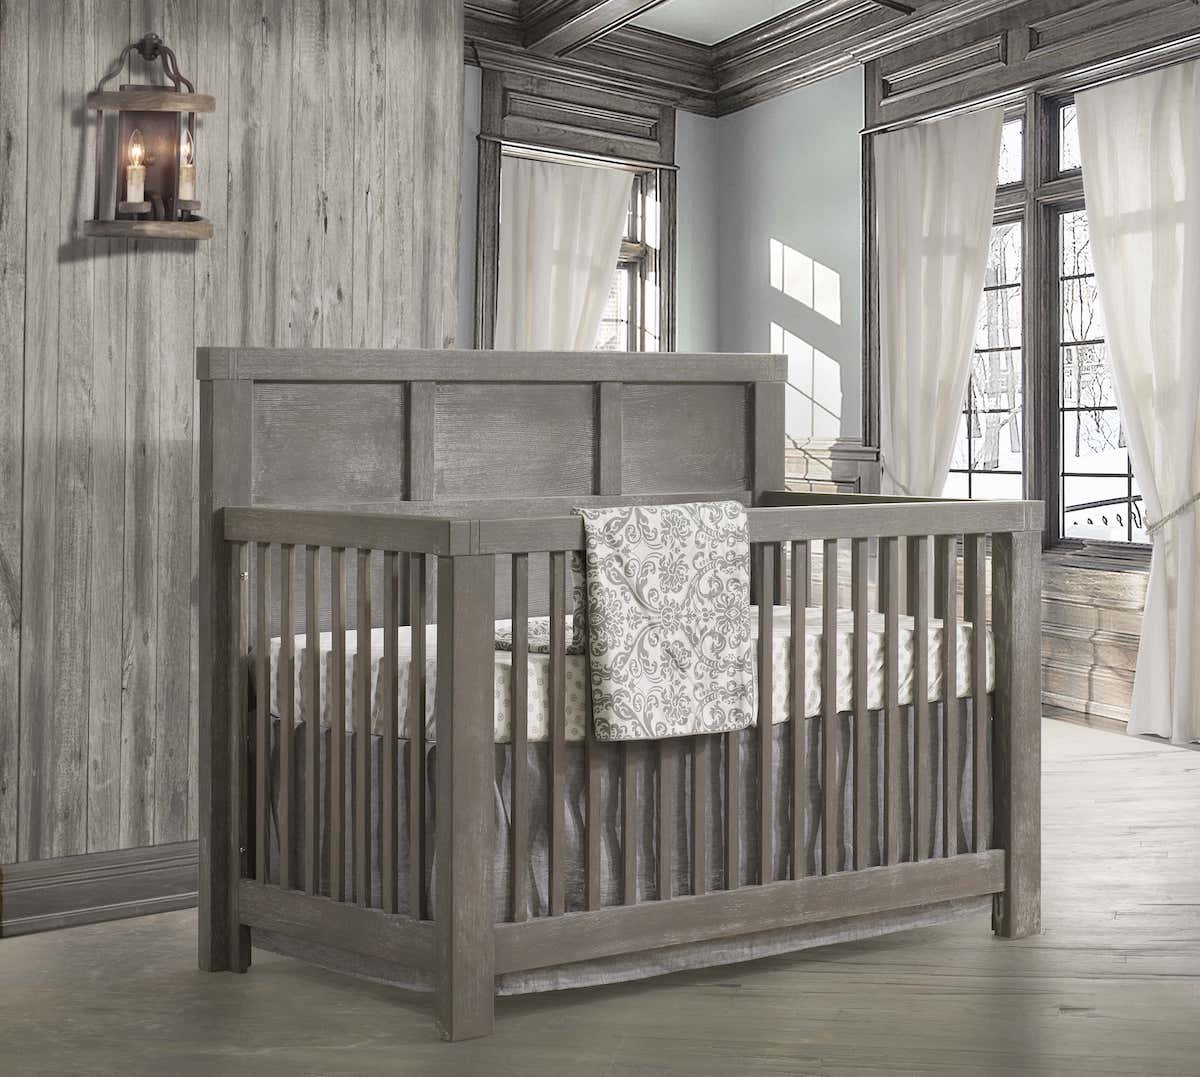 Natart Rustico Convertible Crib and Double Dresser - Owl